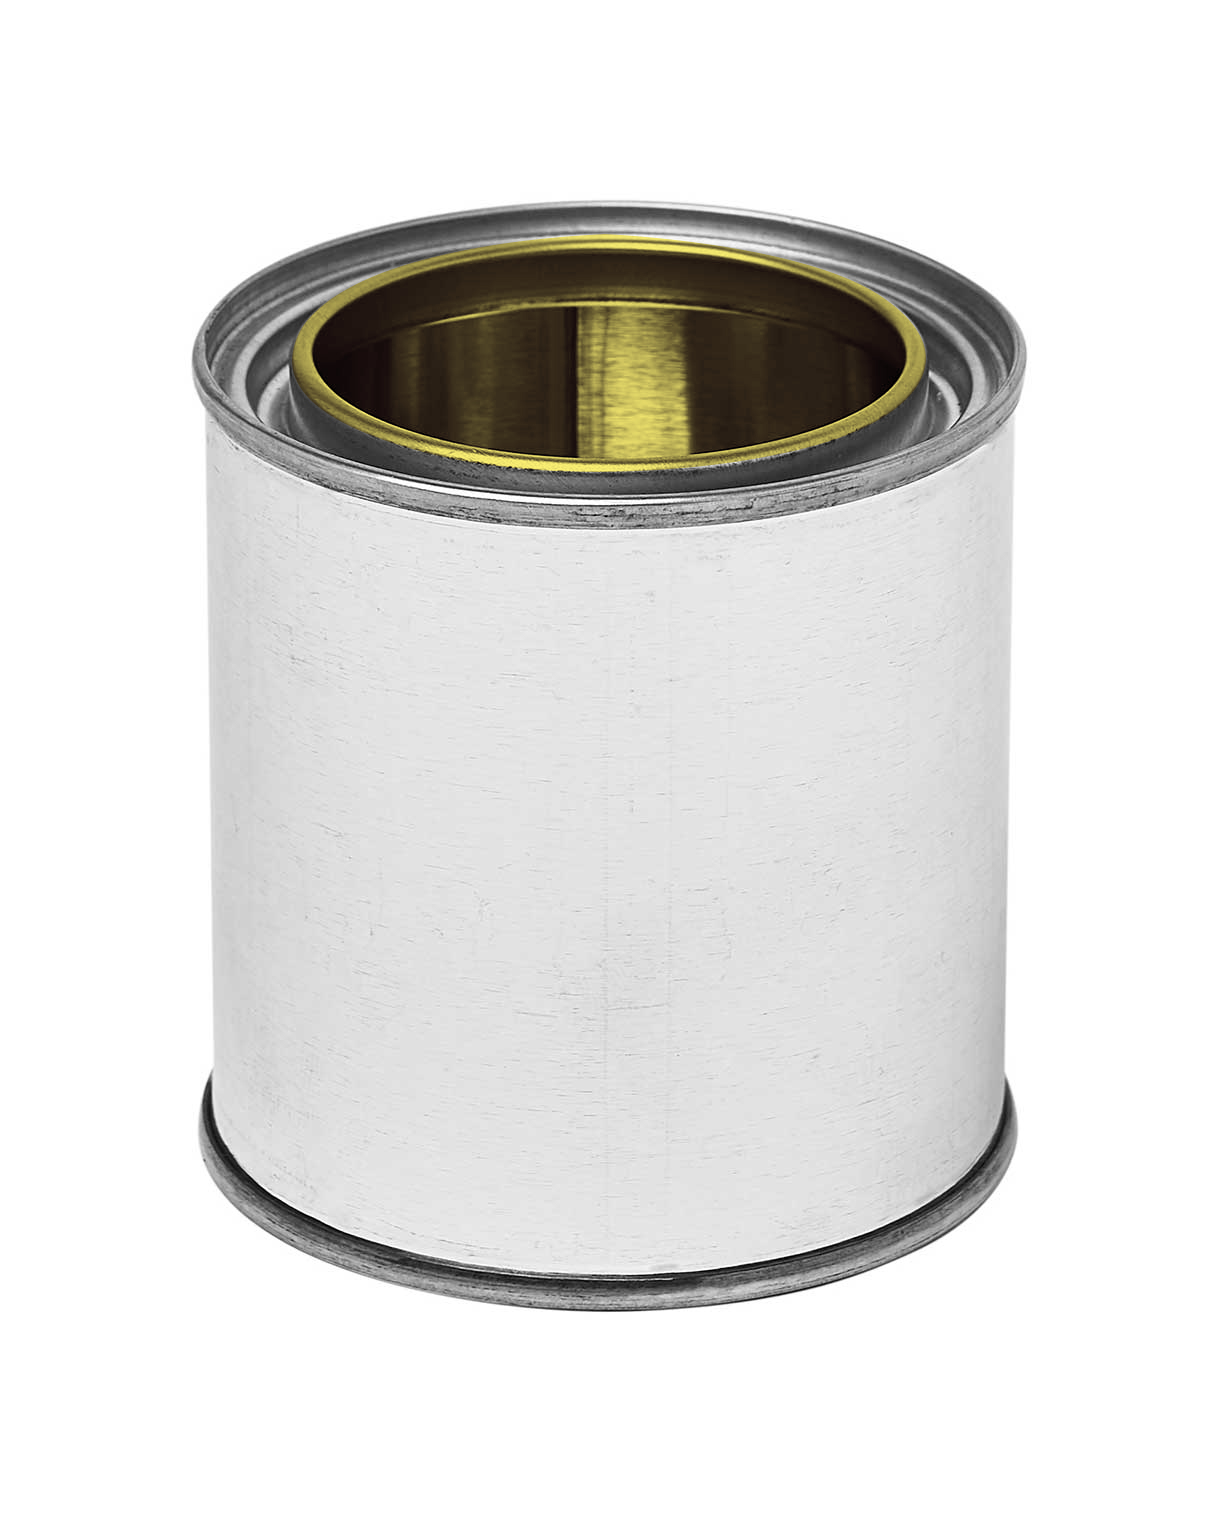 0.5 pt tin silver gold lined round-paint can